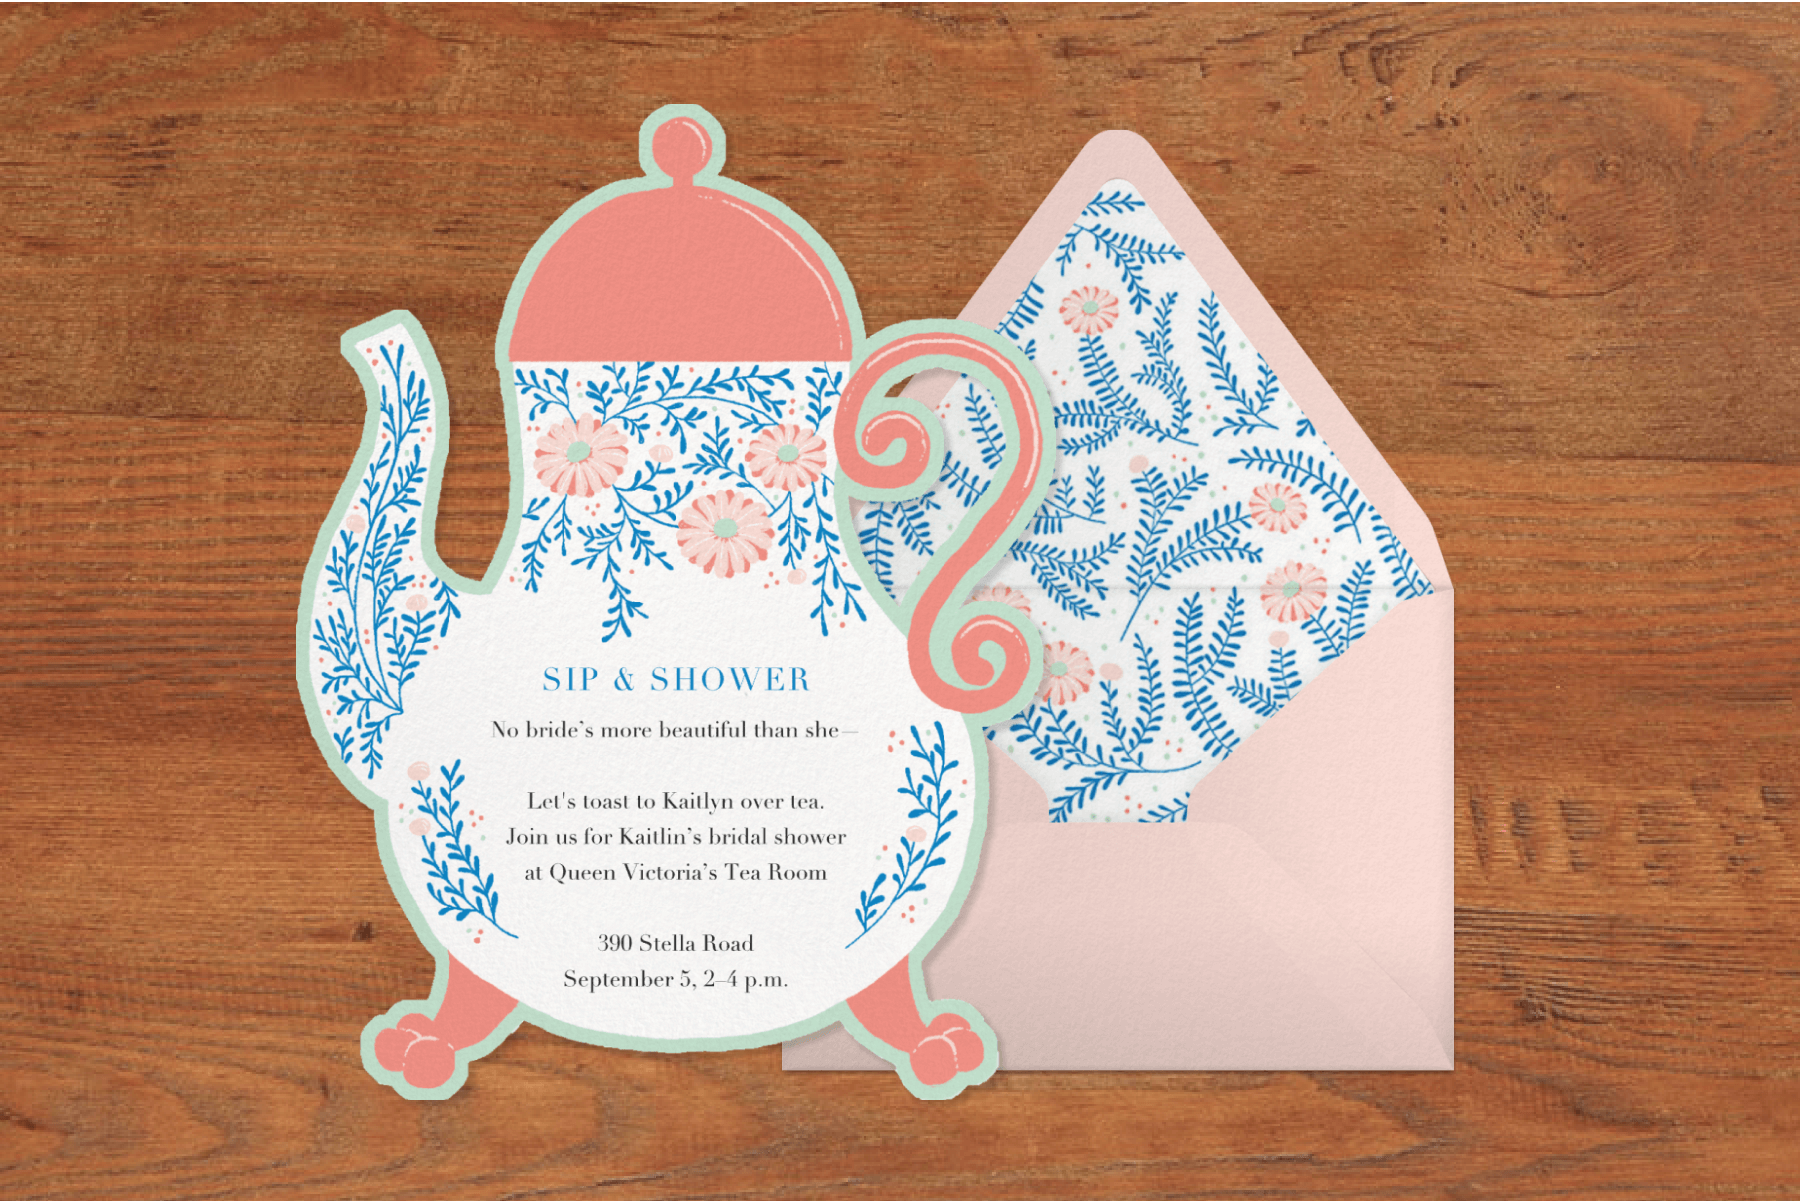 Here’s a toast to grown-up tea parties, where the laughs are loud, the cake is sweet, and the memories made are fond. 